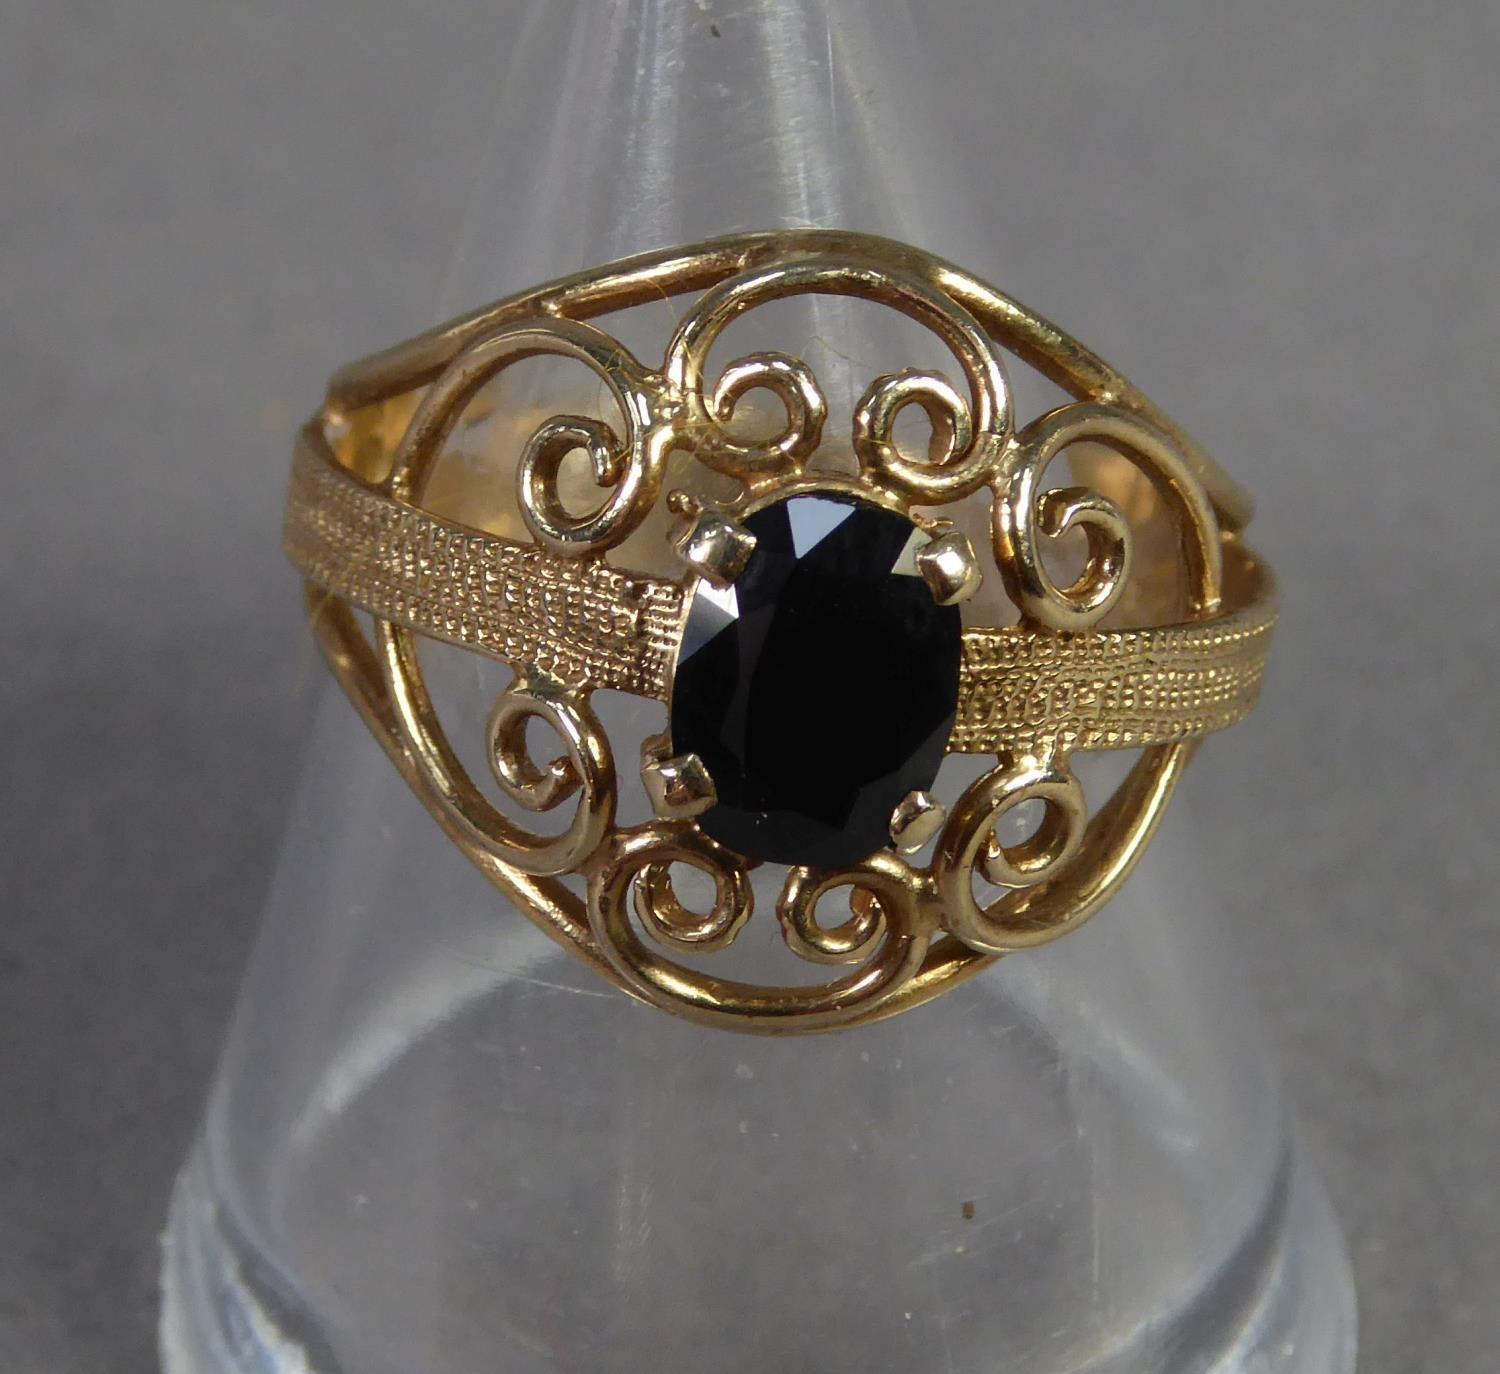 9ct GOLD DRESS RING, the broad circular scrolled wire pattern top set with a dark oval sapphire, - Image 2 of 2